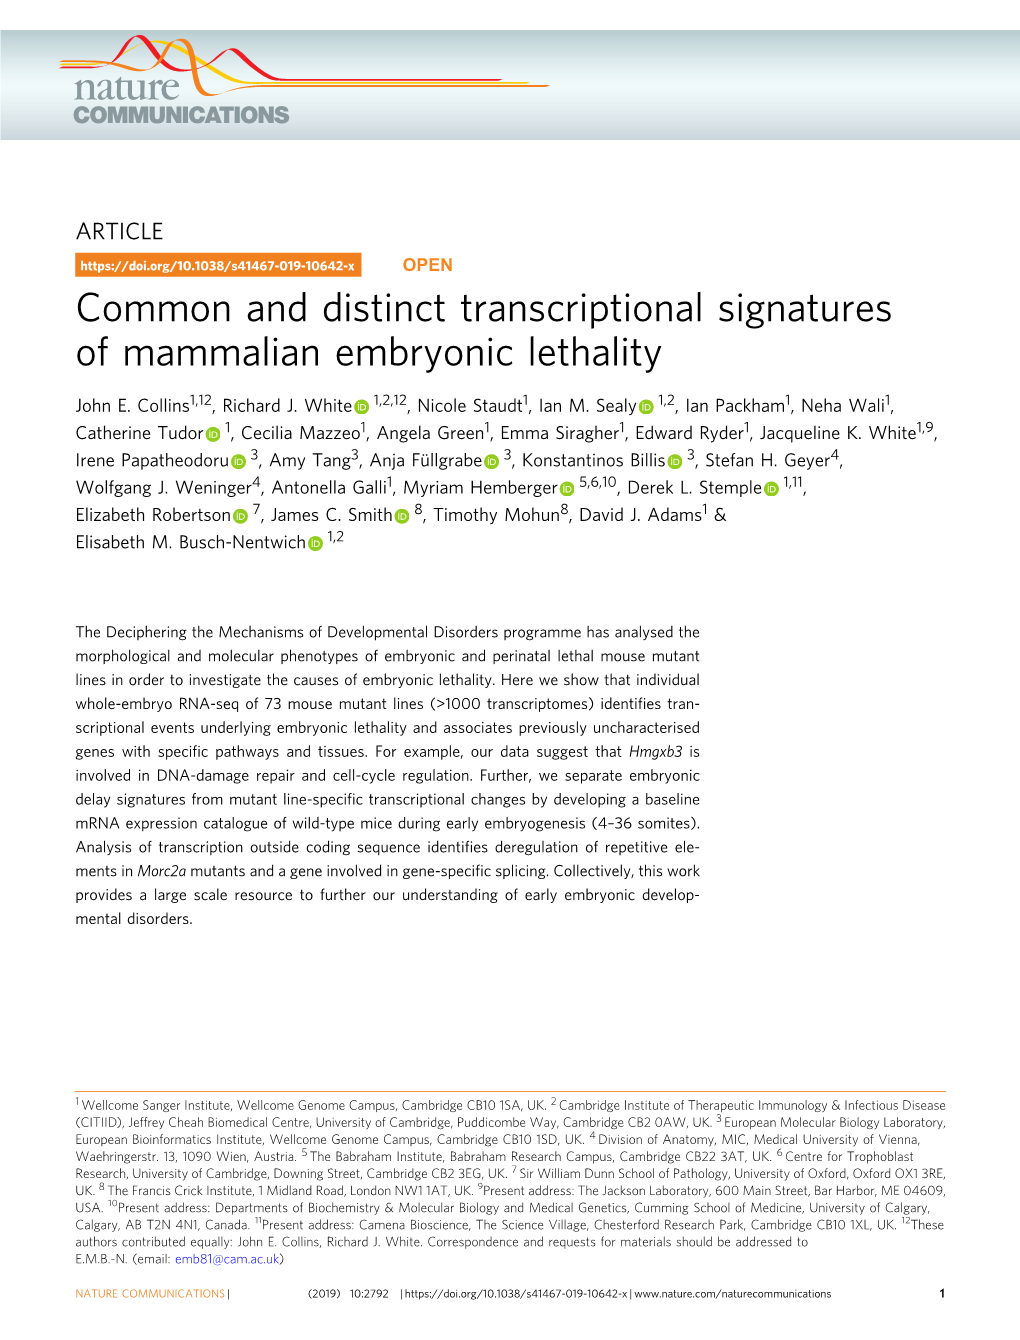 Common and Distinct Transcriptional Signatures of Mammalian Embryonic Lethality